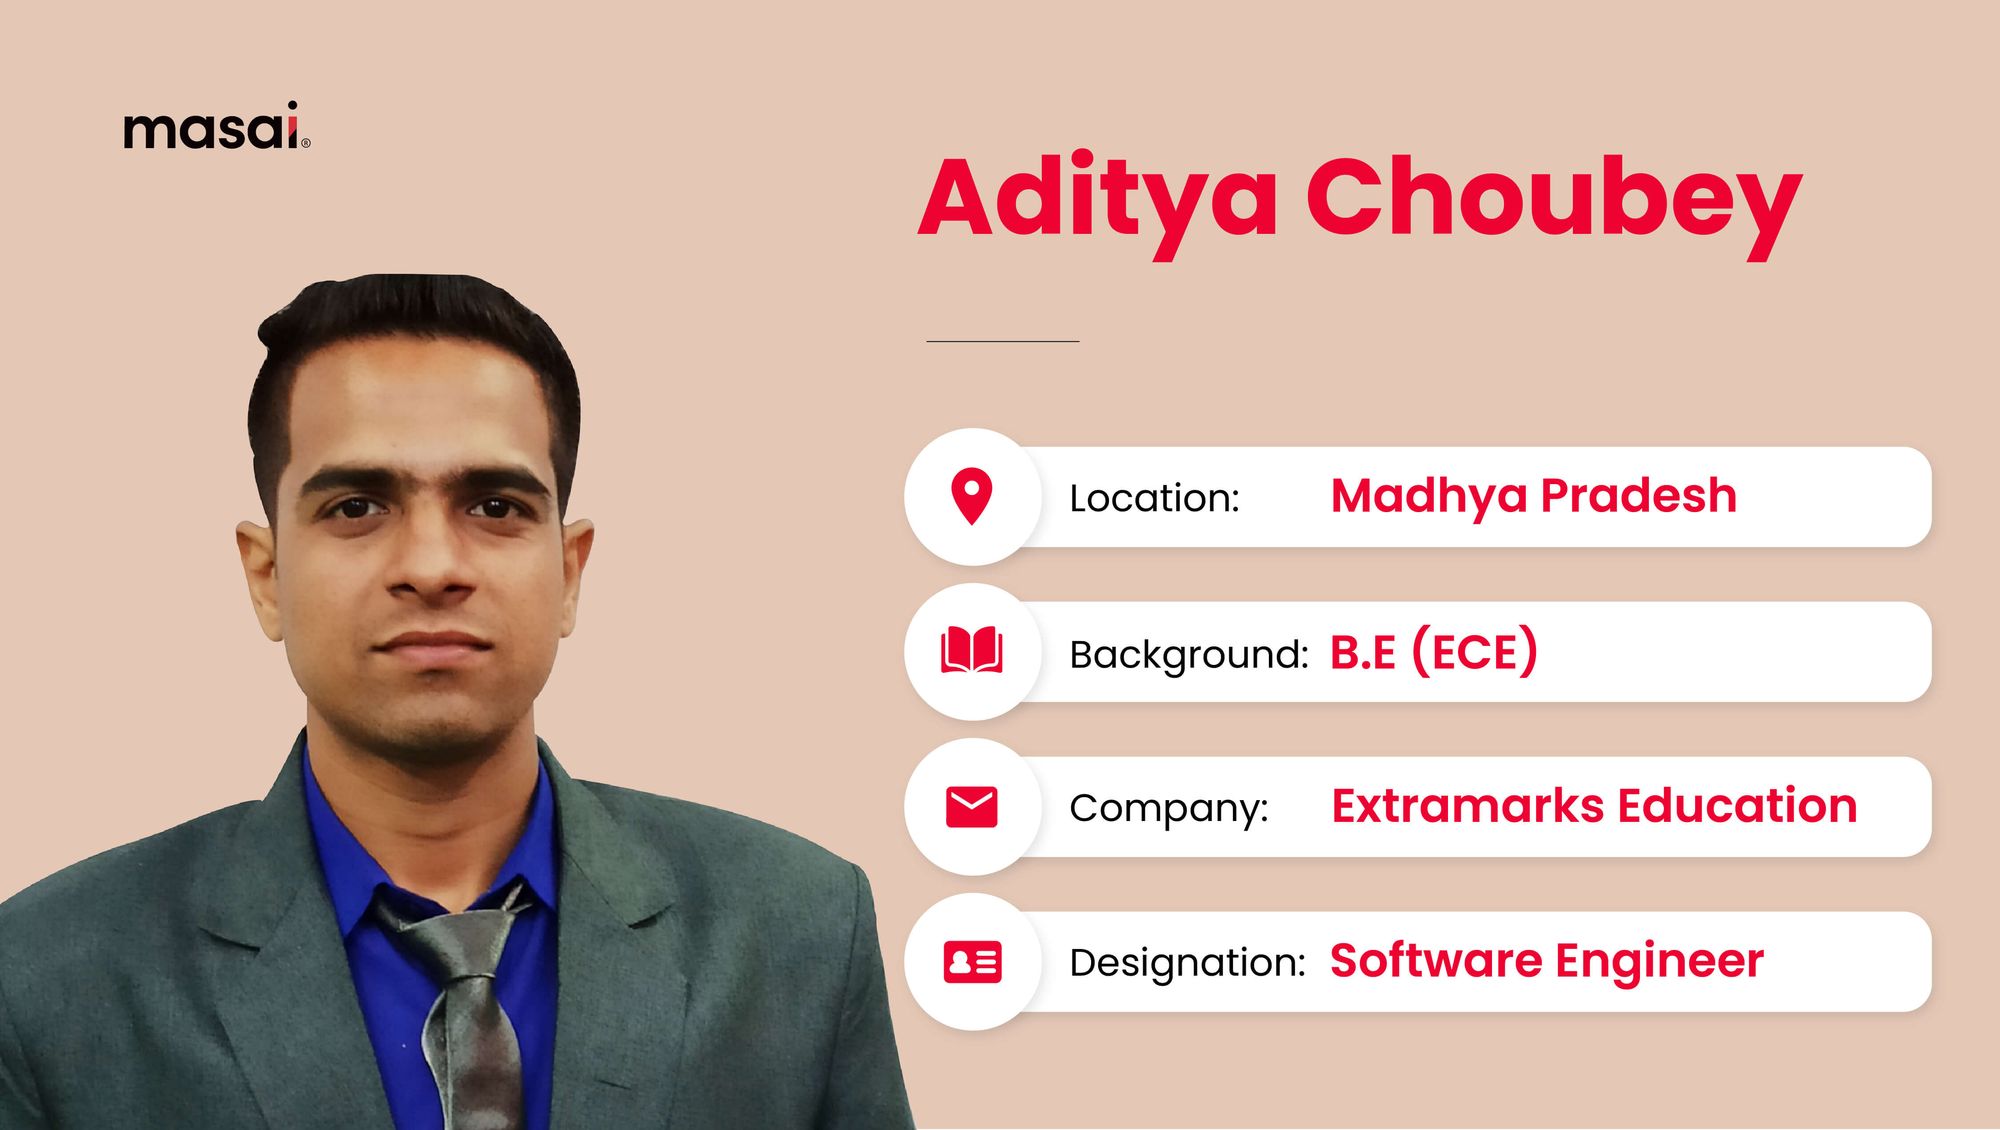 Aditya Choubey - A Masai graduate now working as Software engineer at Extramarks